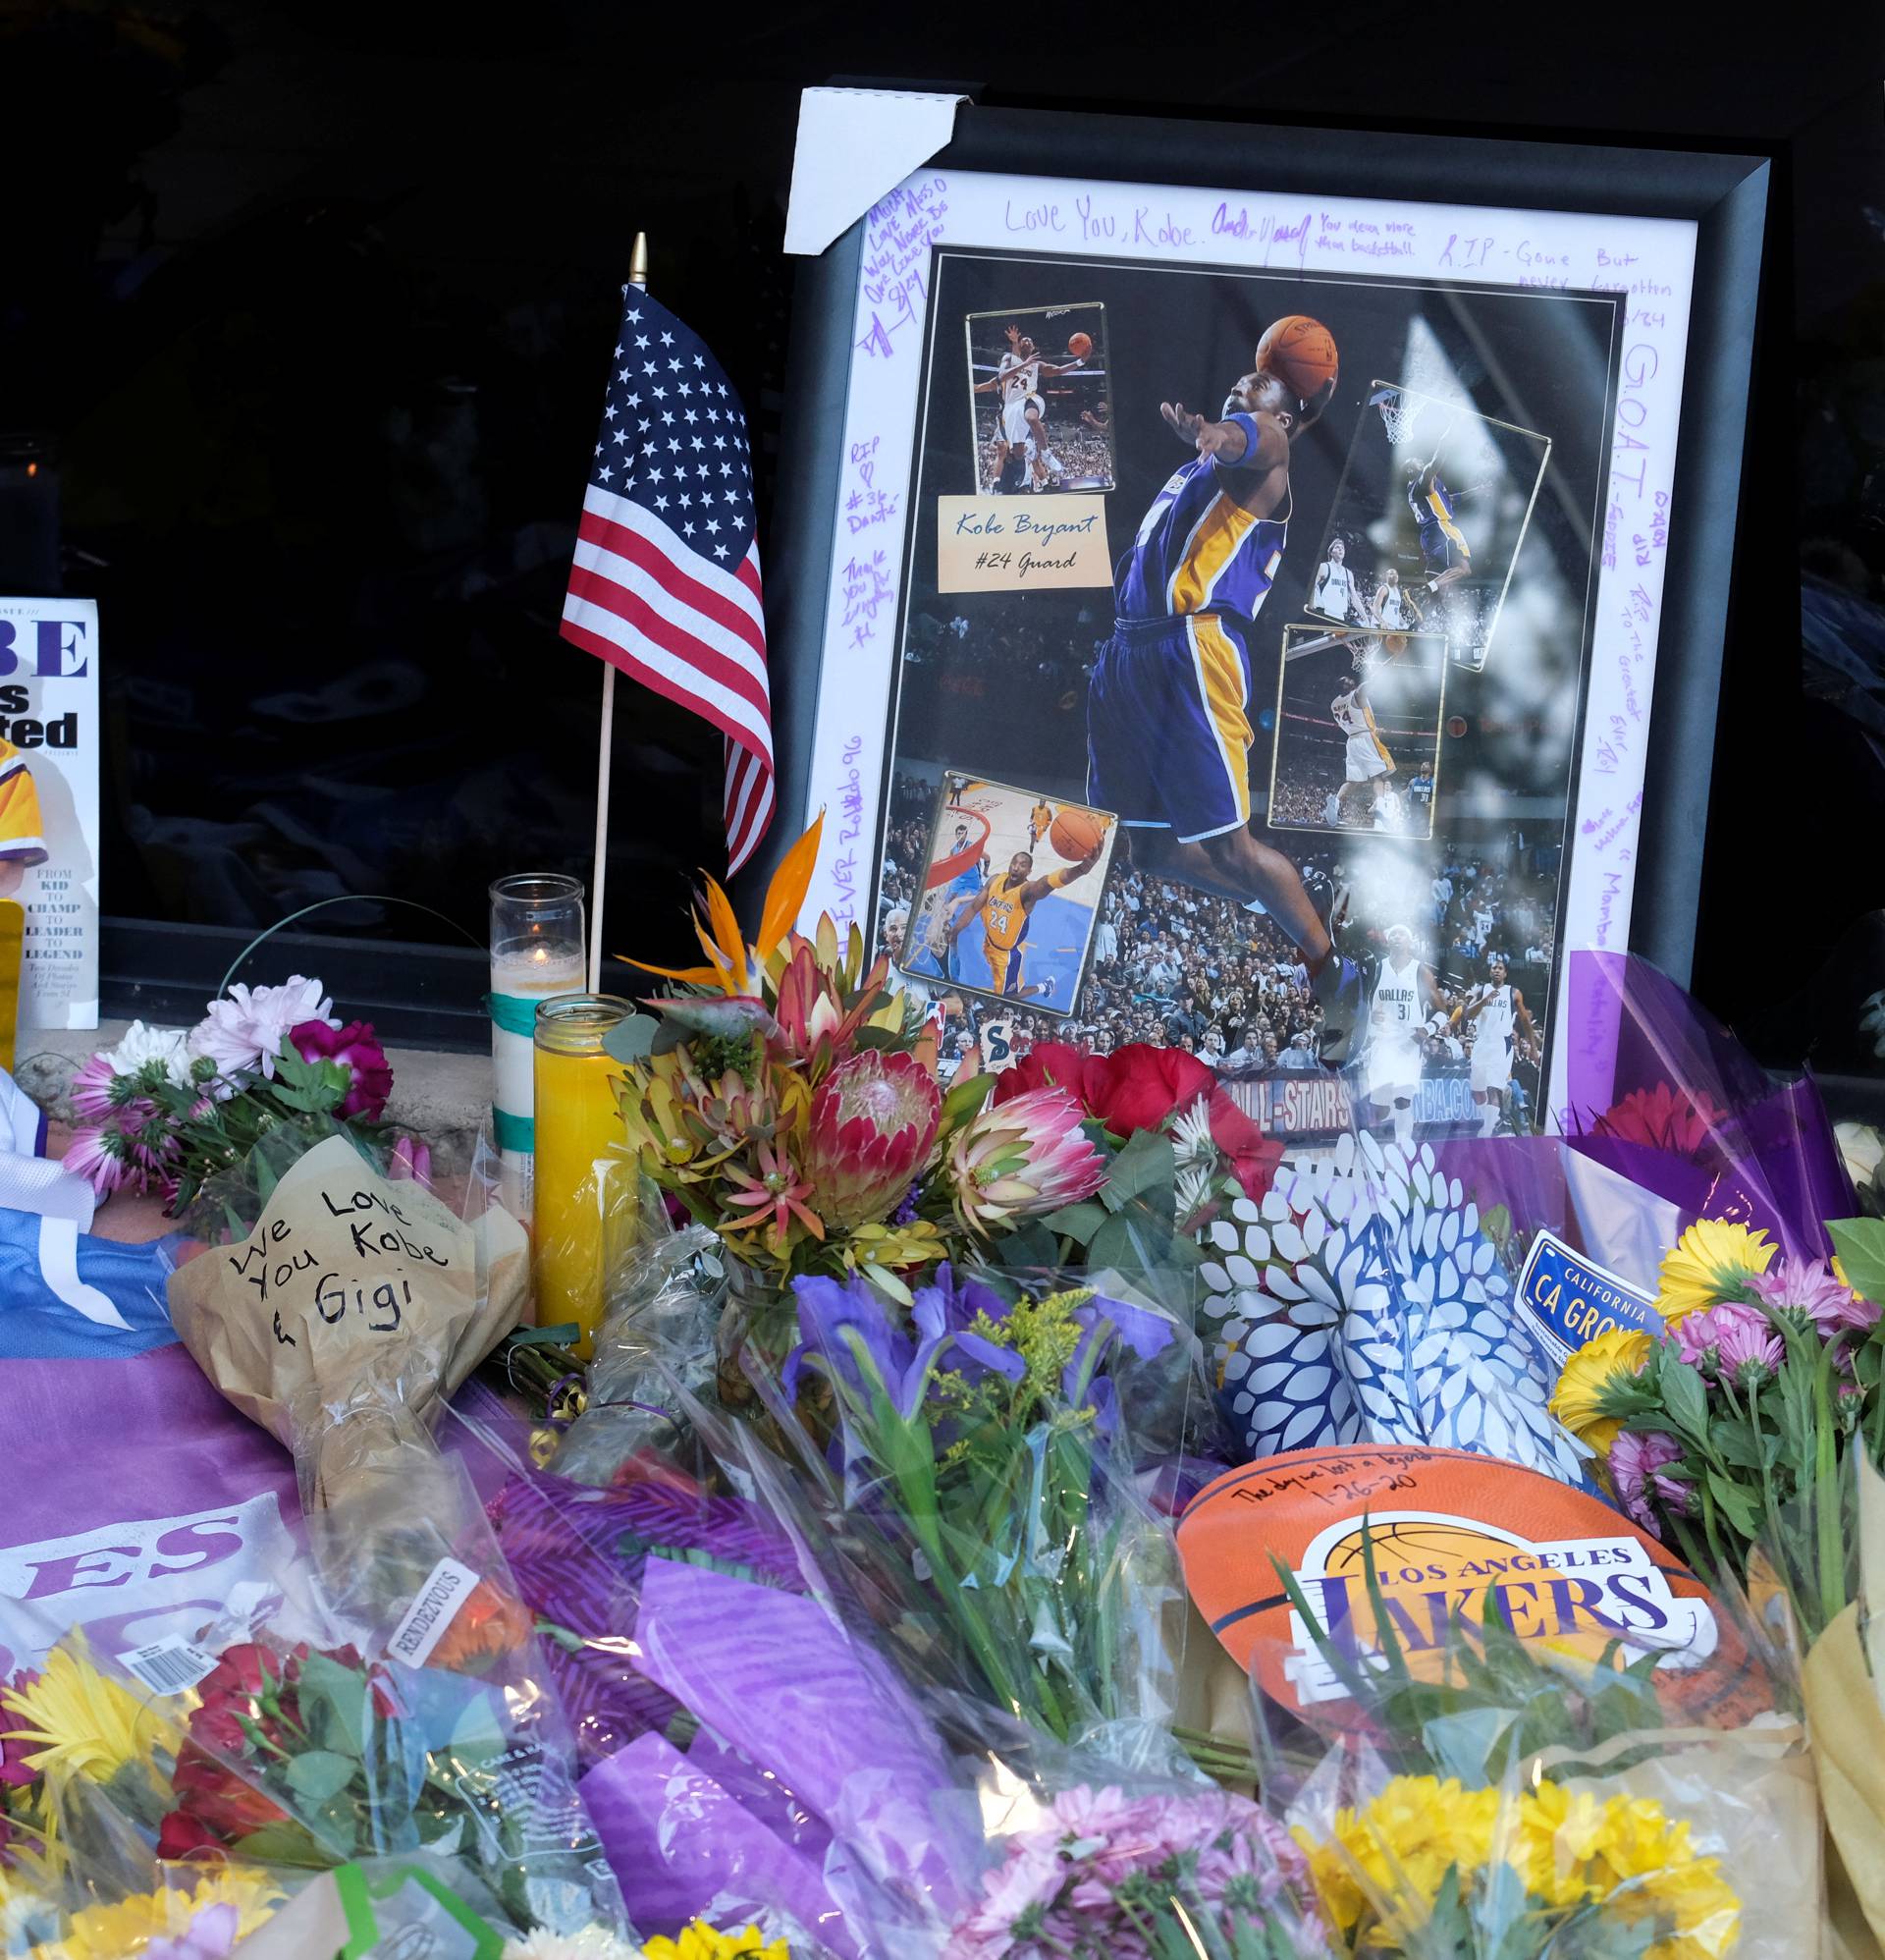 Flowers, photos and messages are placed at a makeshift memorial for former NBA player Kobe Bryant outside of the Mamba Sports Academy in Thousand Oaks